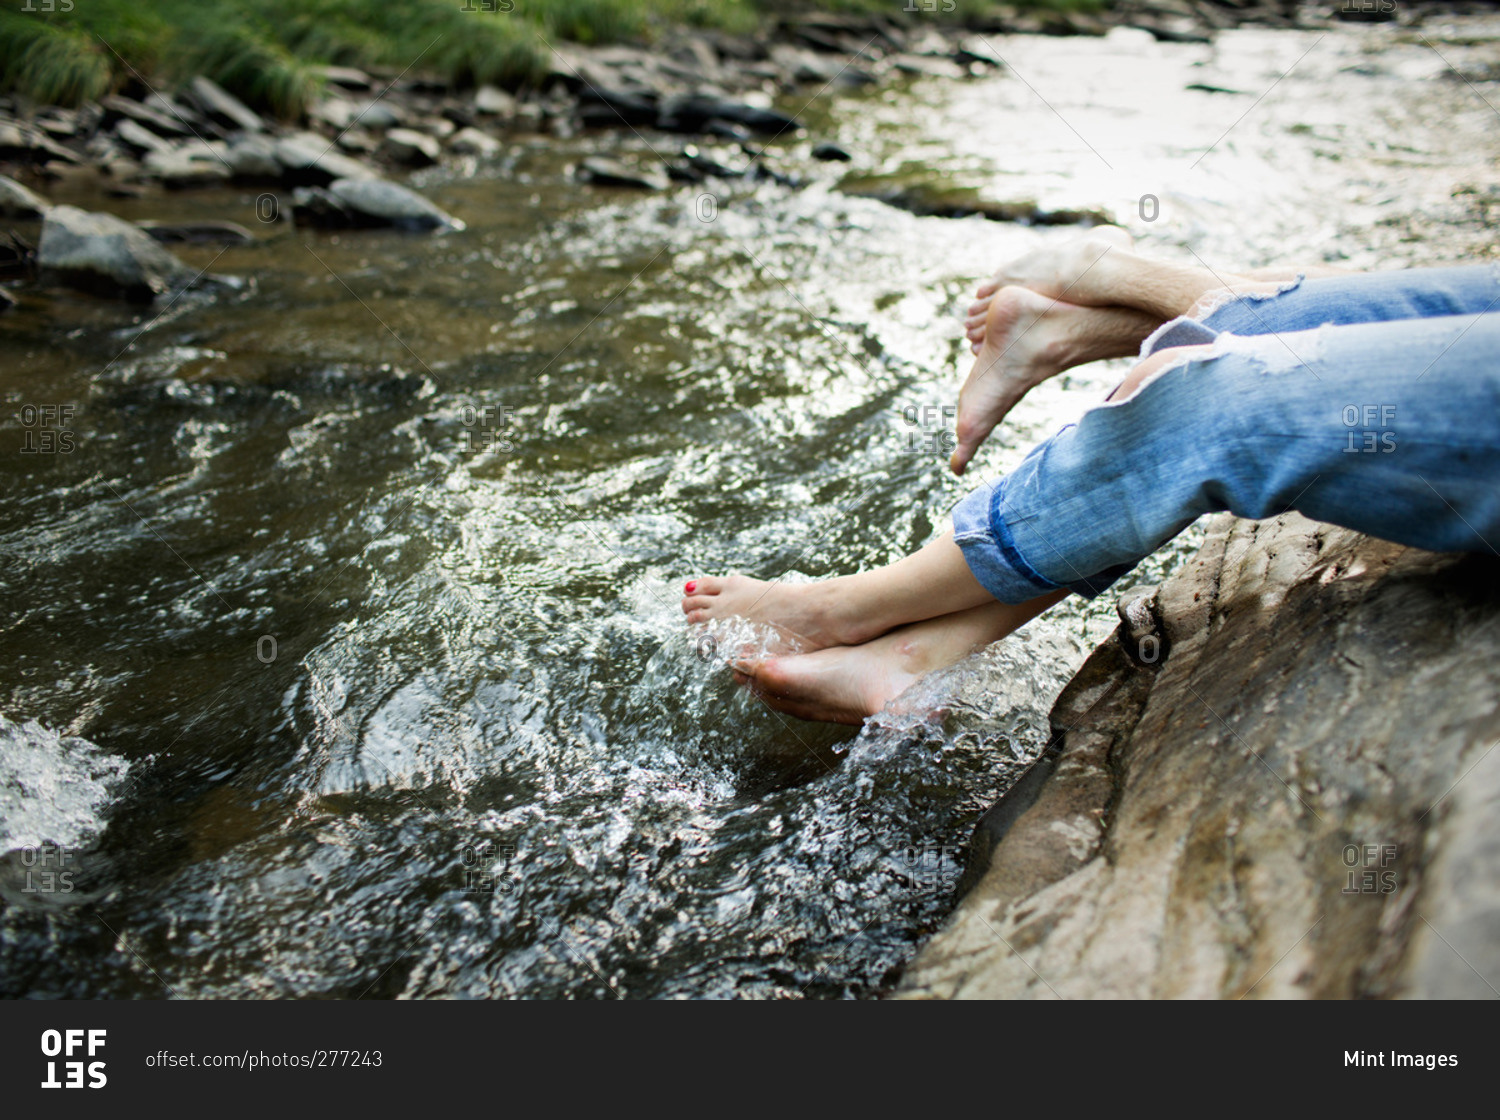 A woman in fashionable jeans with a rip, with her feet in the cool flowing waters of a river